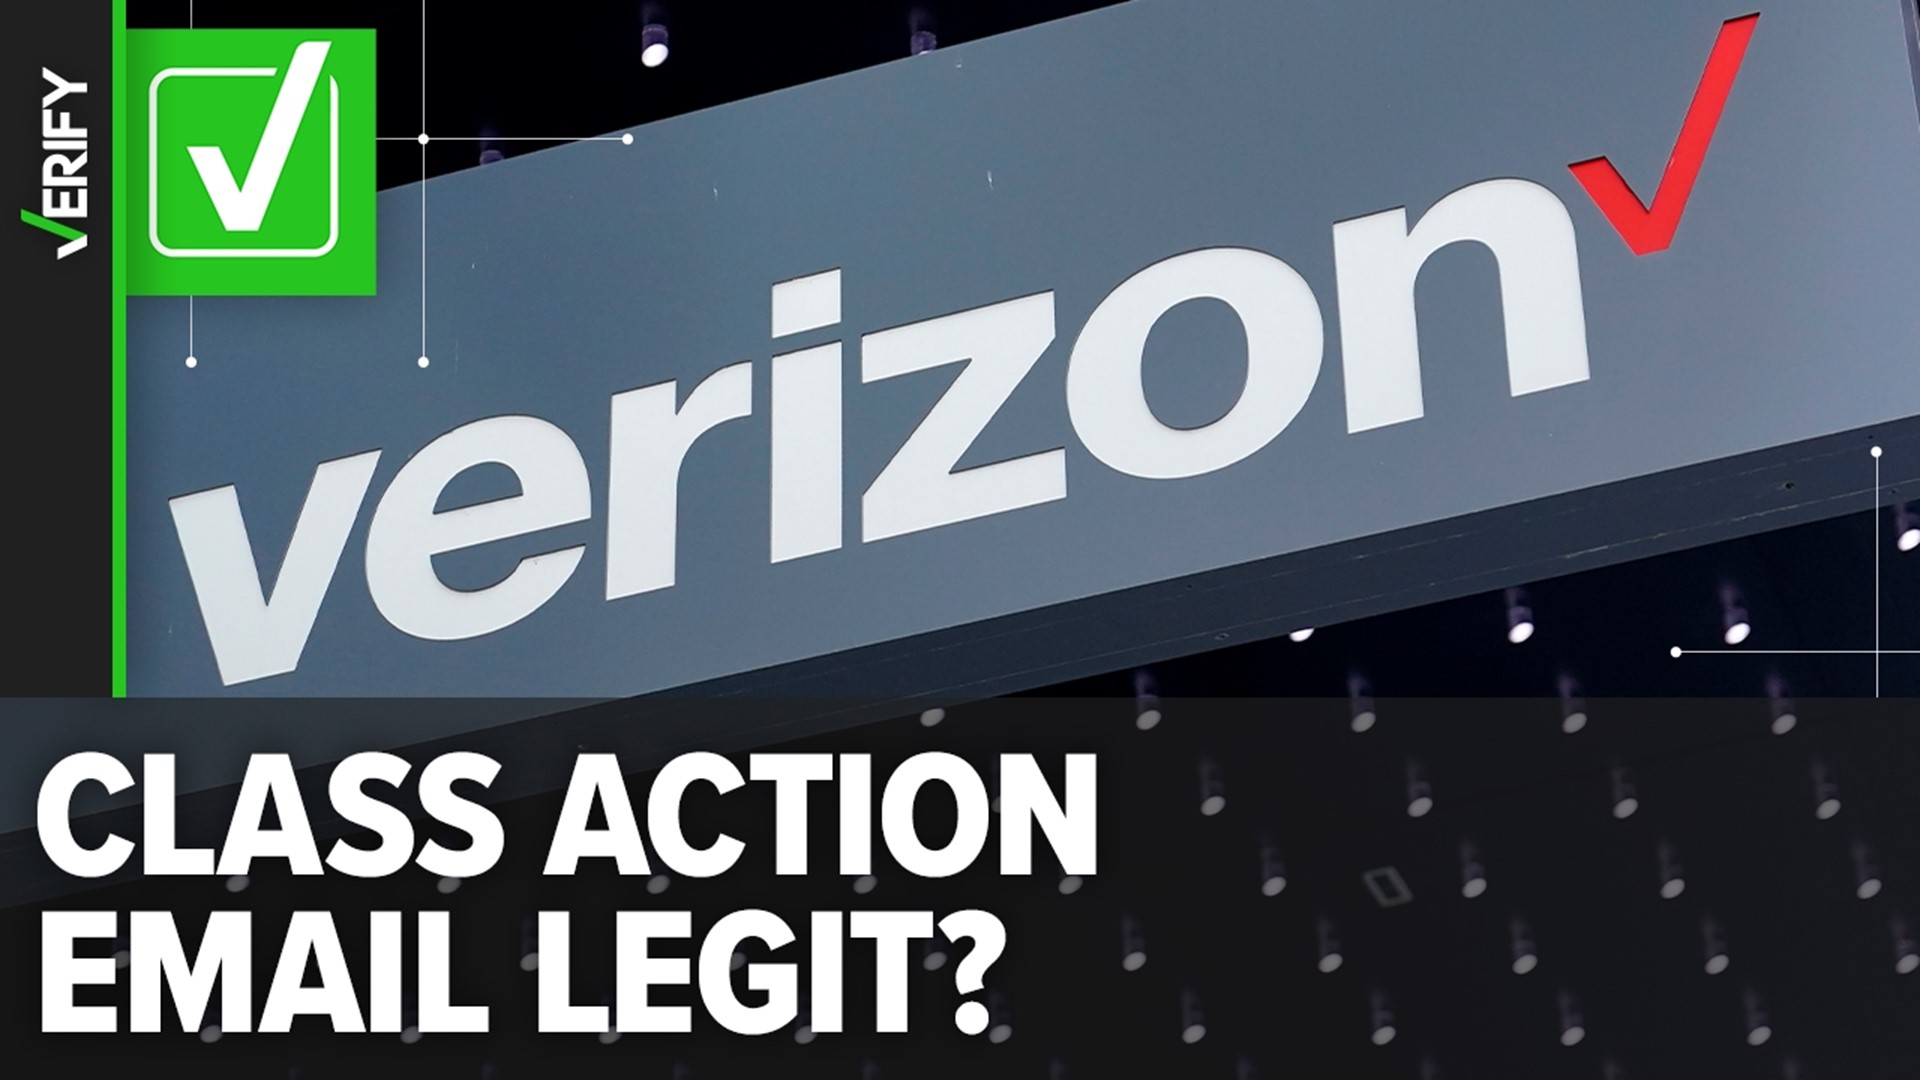 Some Verizon wireless customers may be eligible to receive money from a $100 million class action lawsuit settlement. Here’s how to file a claim.